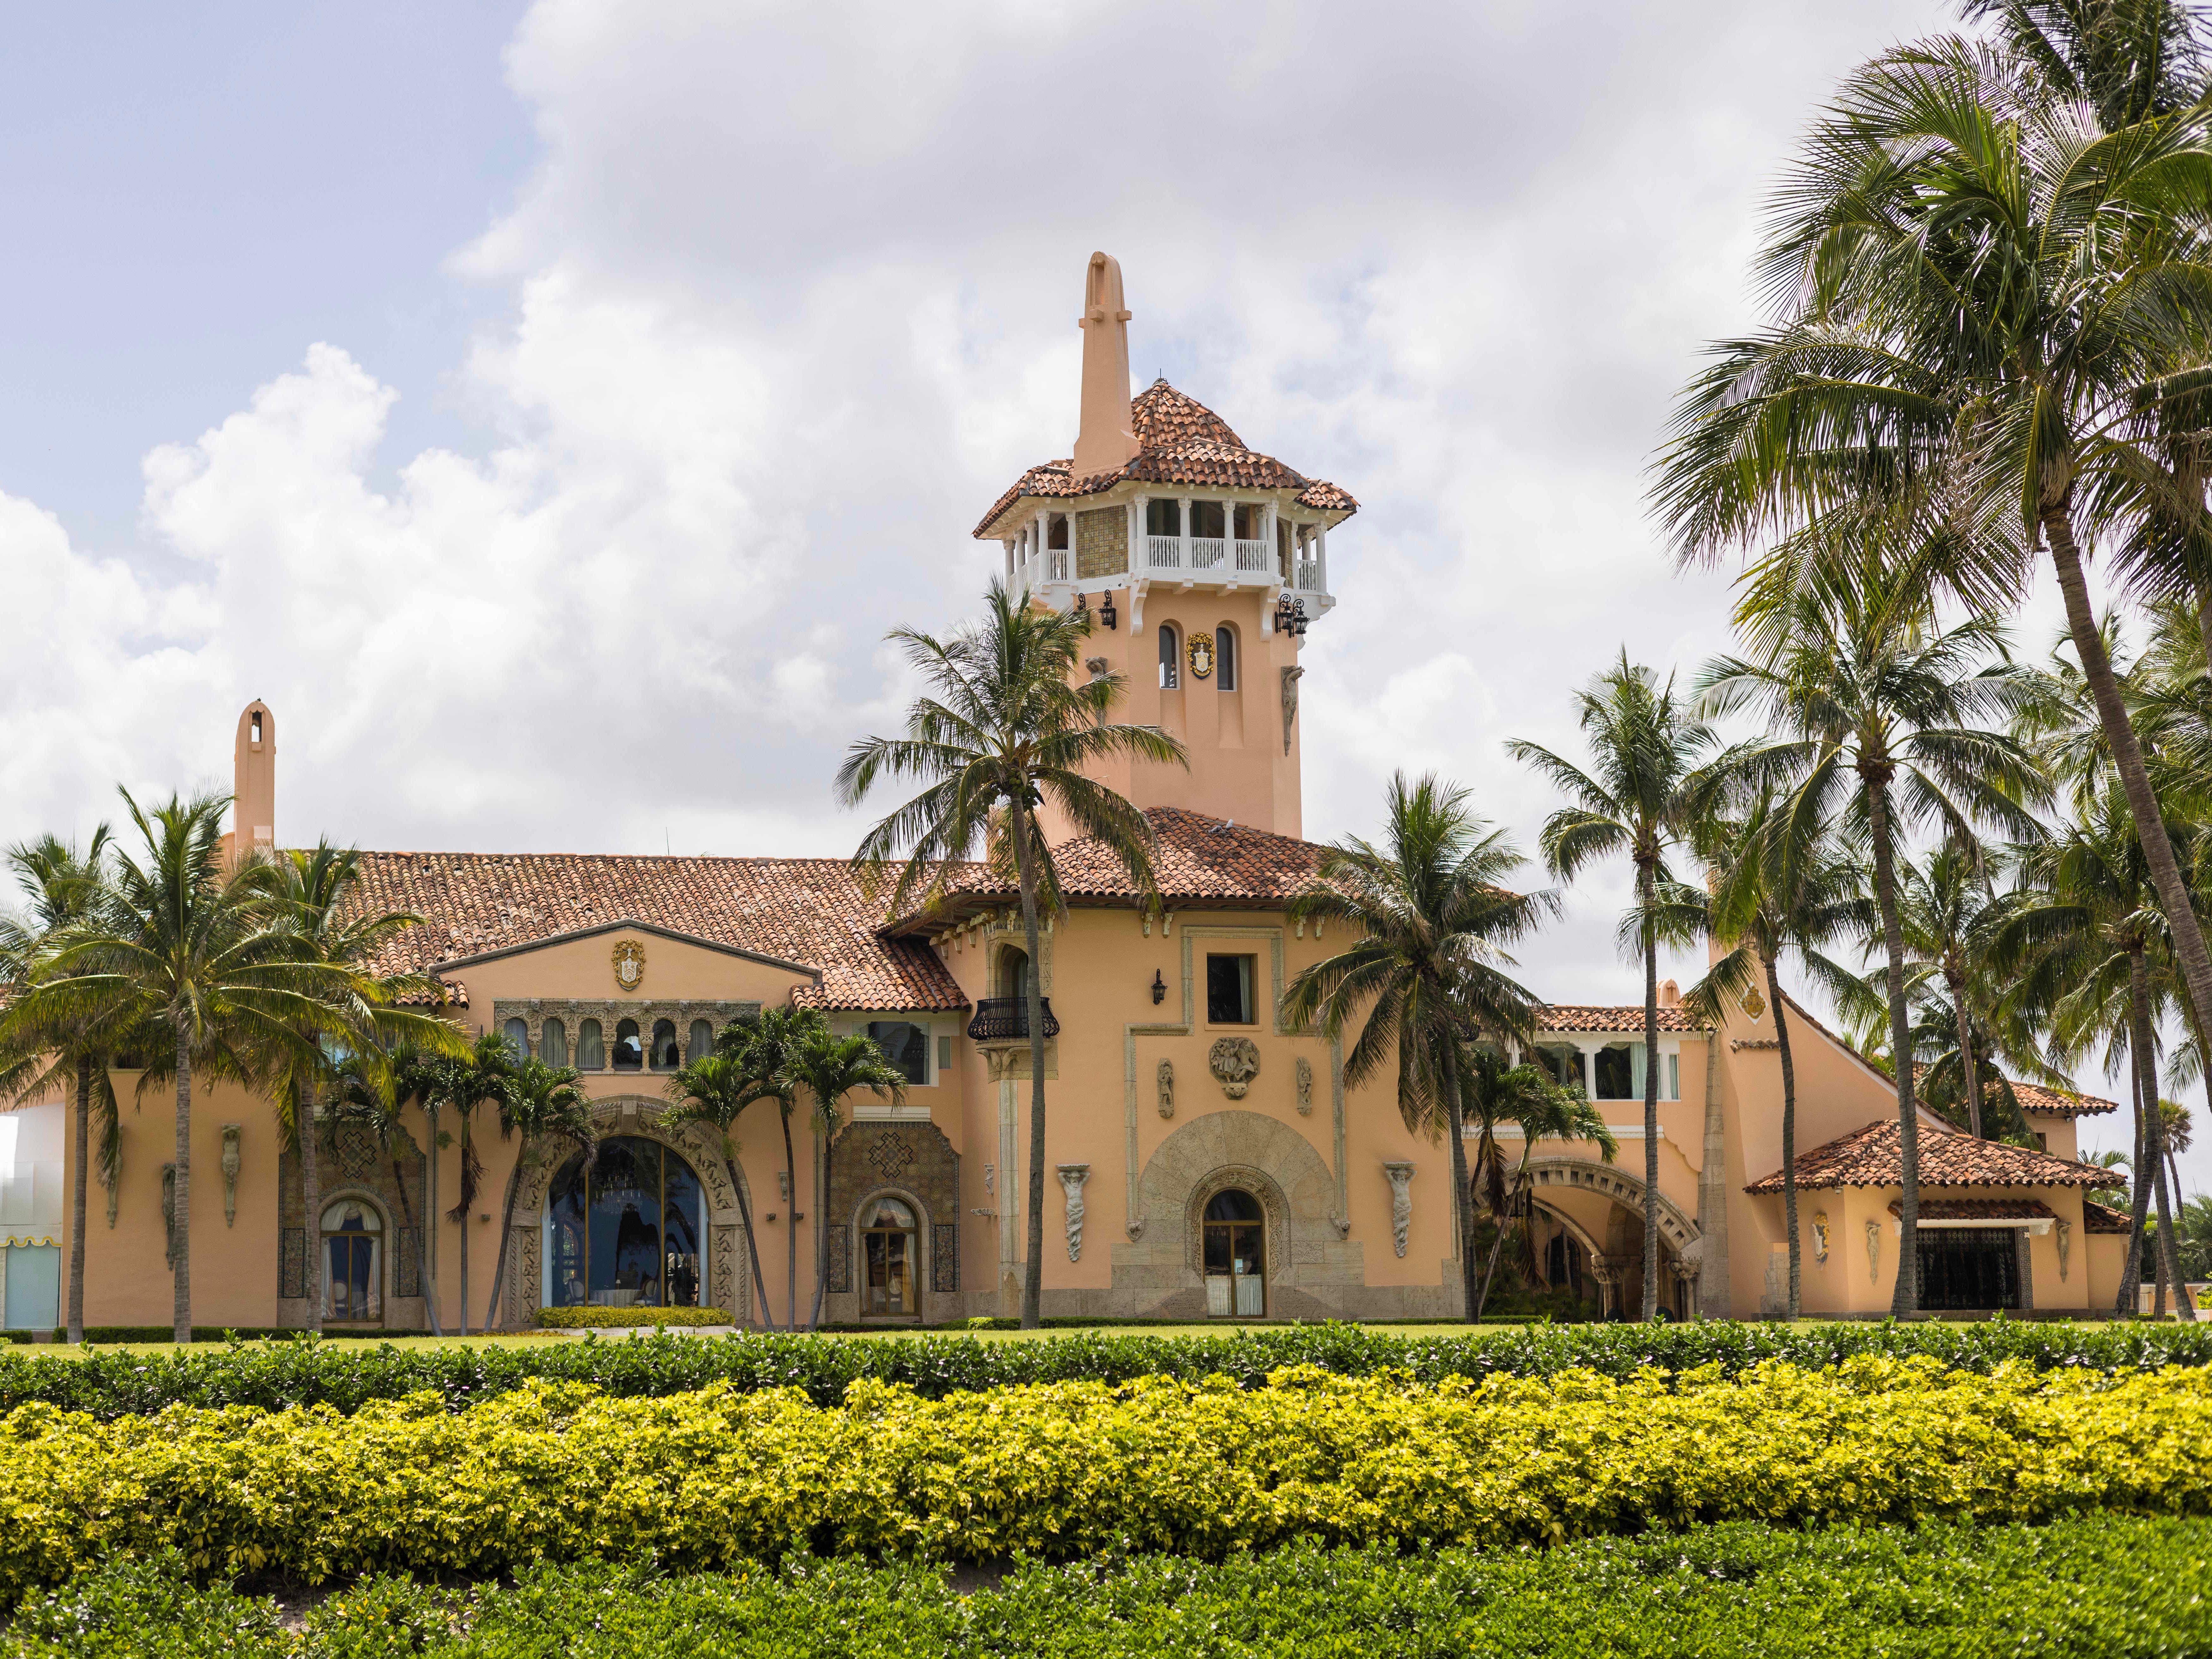 Secret Service locks down Mar-a-Lago as it amps up security around Trump